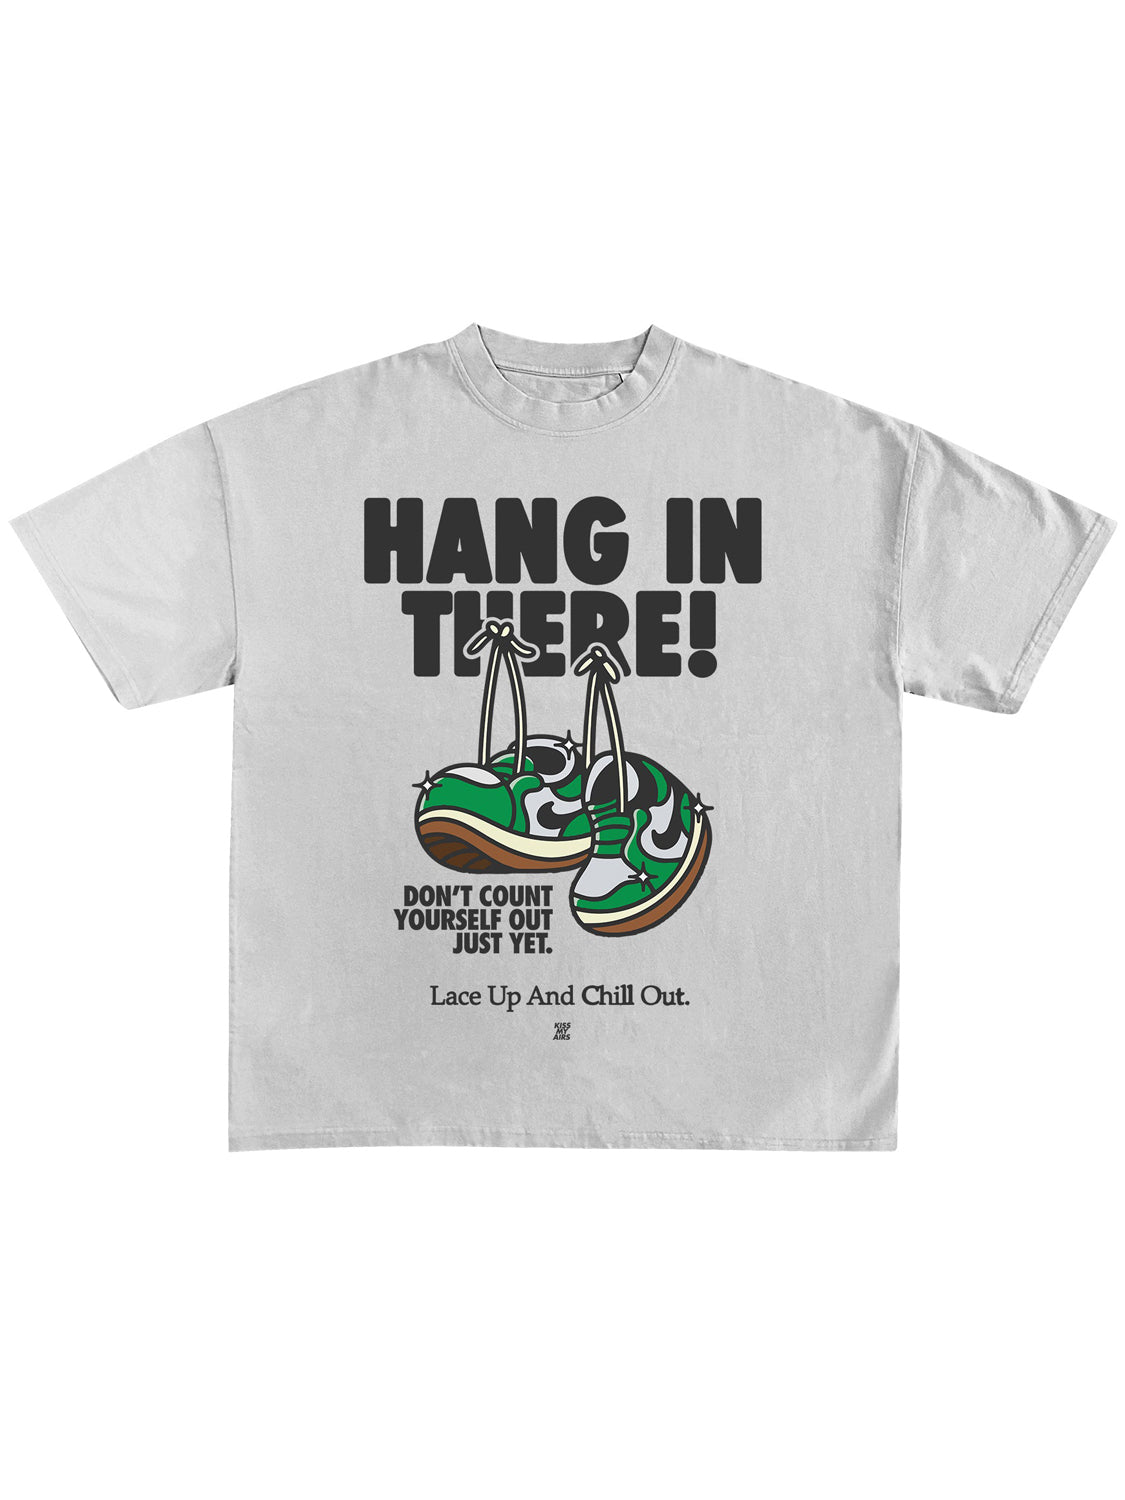 T-SHIRT "HANG IN THERE"  - Col. Bianco